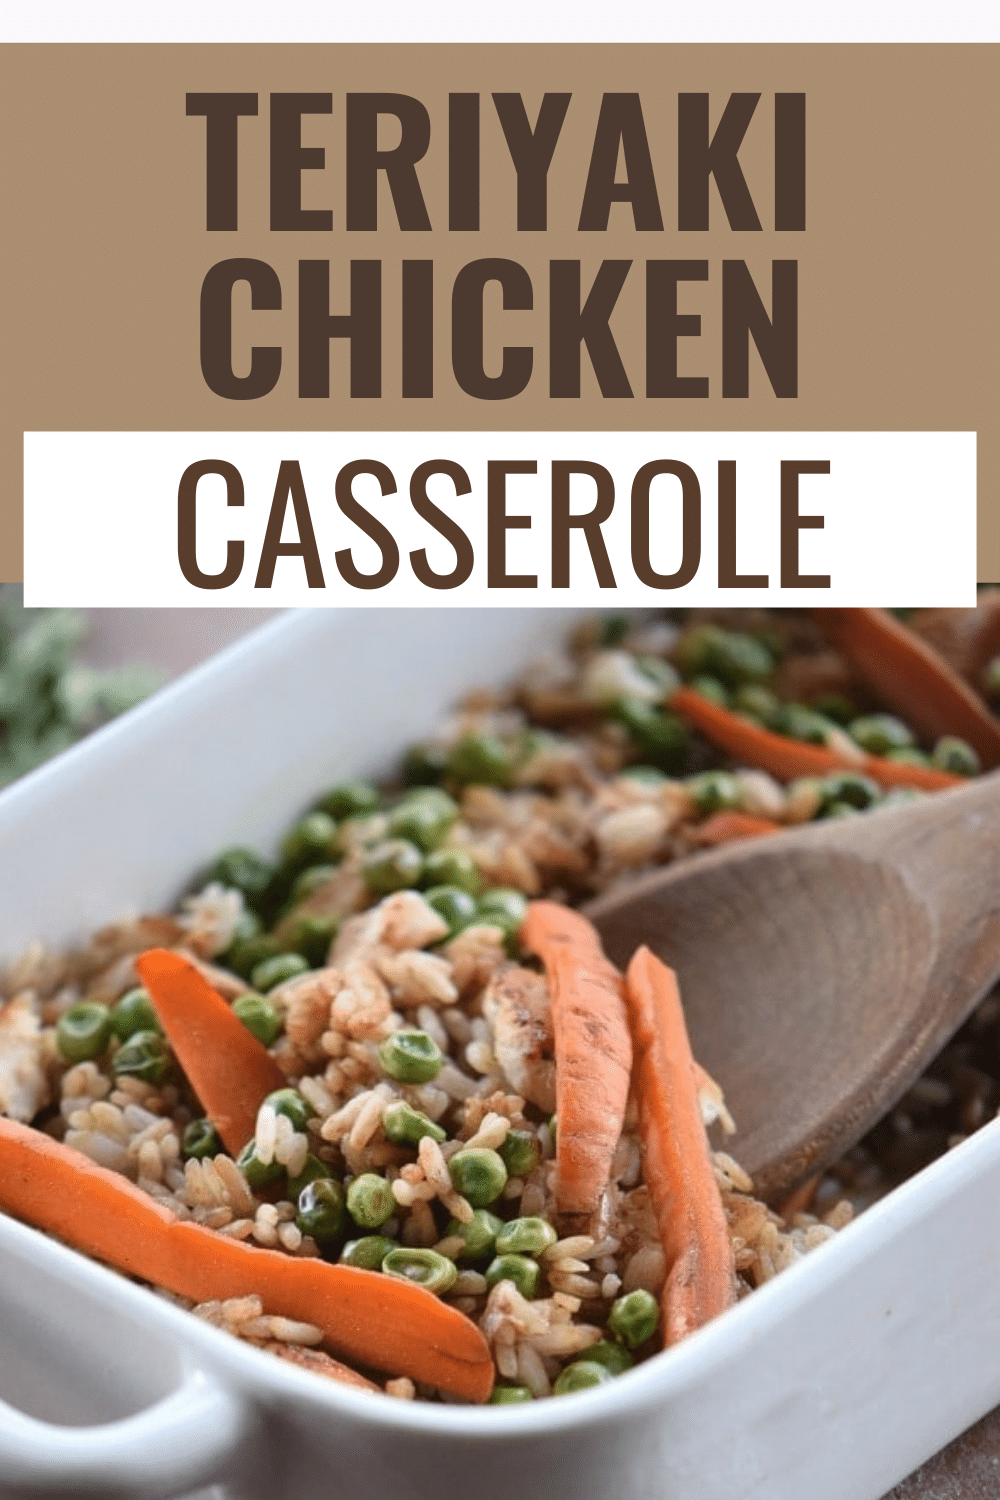 Teriyaki Chicken Casserole is an easy, flavorful dinner that everyone in the family loves. No wok required - the oven does most of the work! #casserole #dinner #teriyakichicken via @wondermomwannab